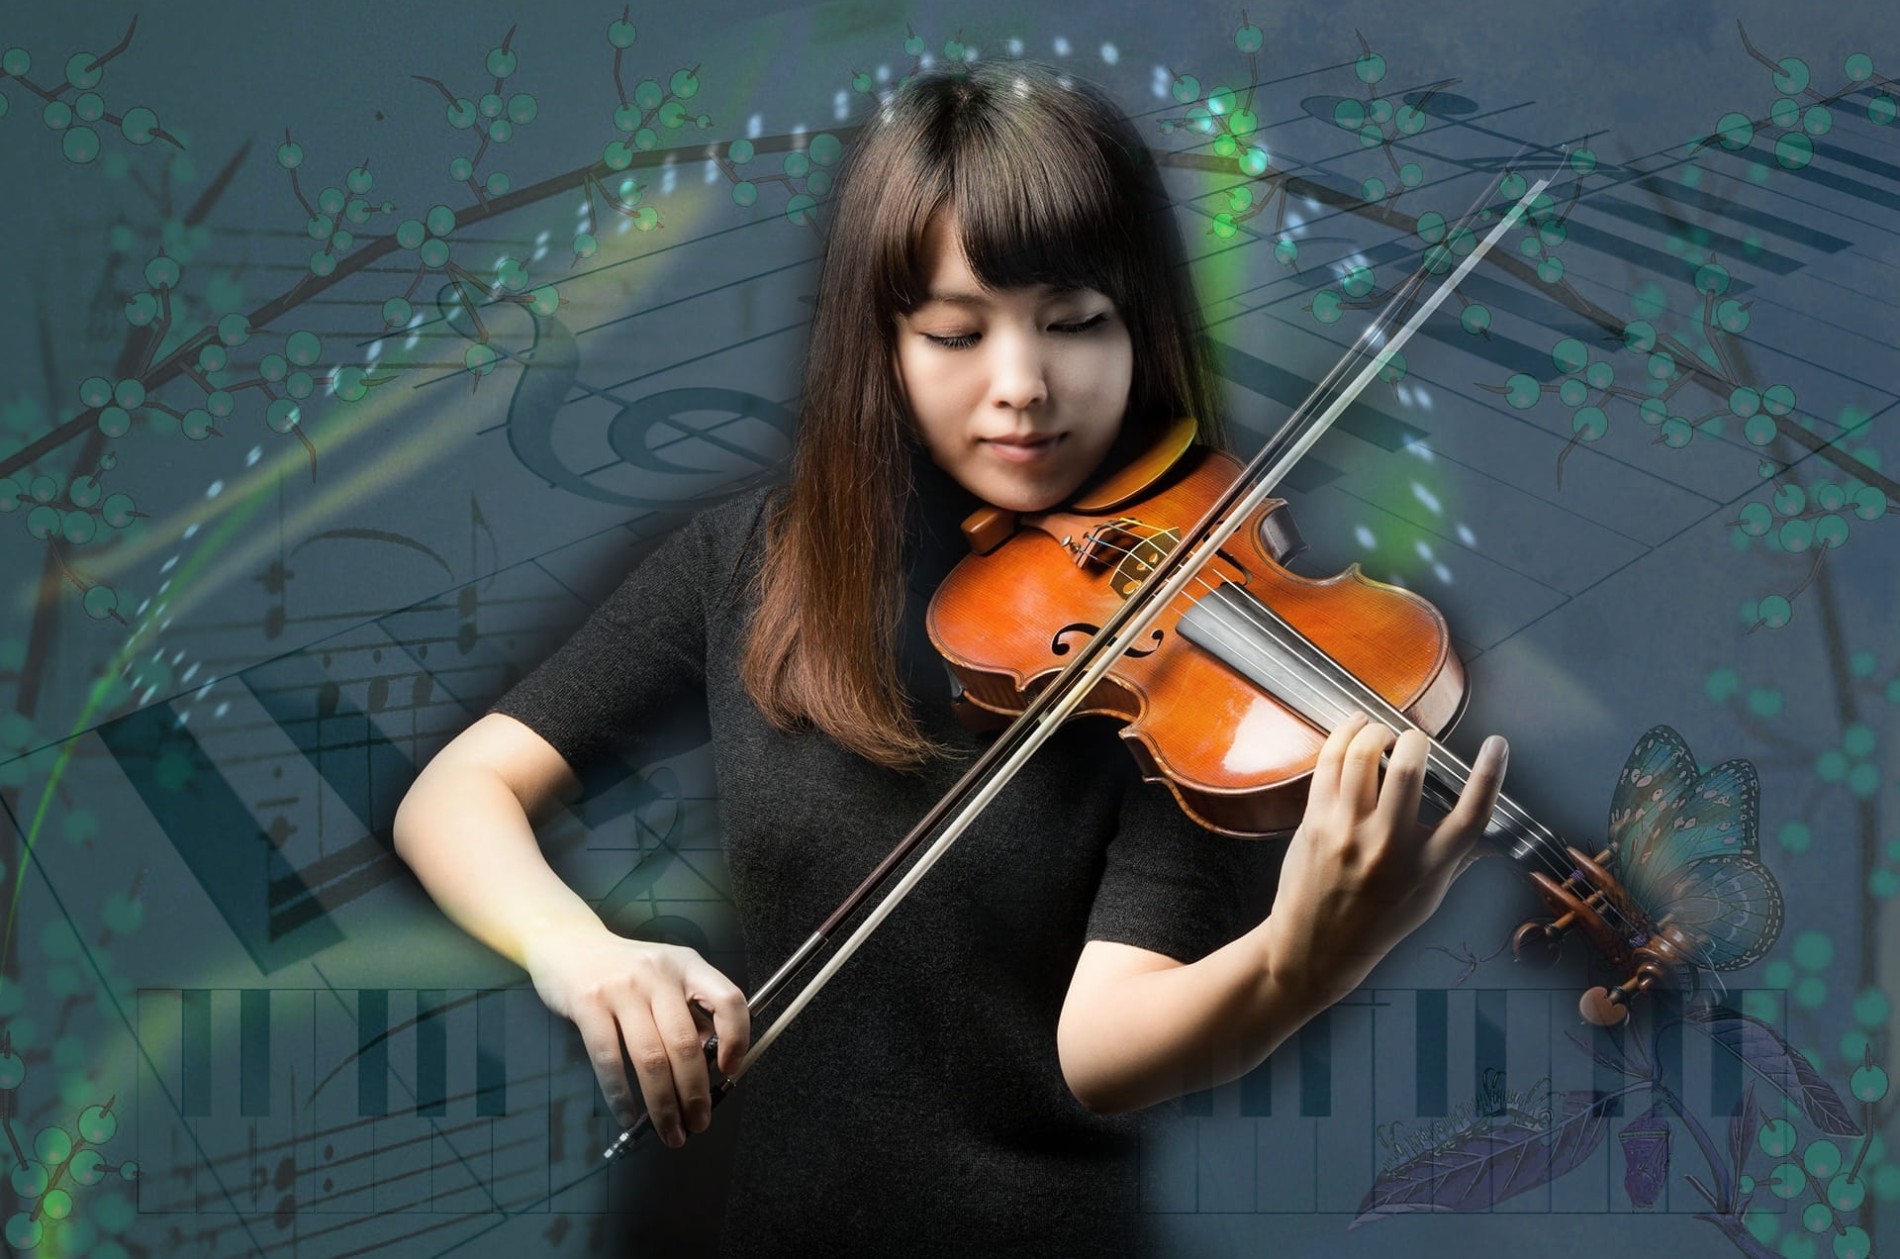 A woman playing violin against a graphic backdrop filled with musical notes and piano keys.